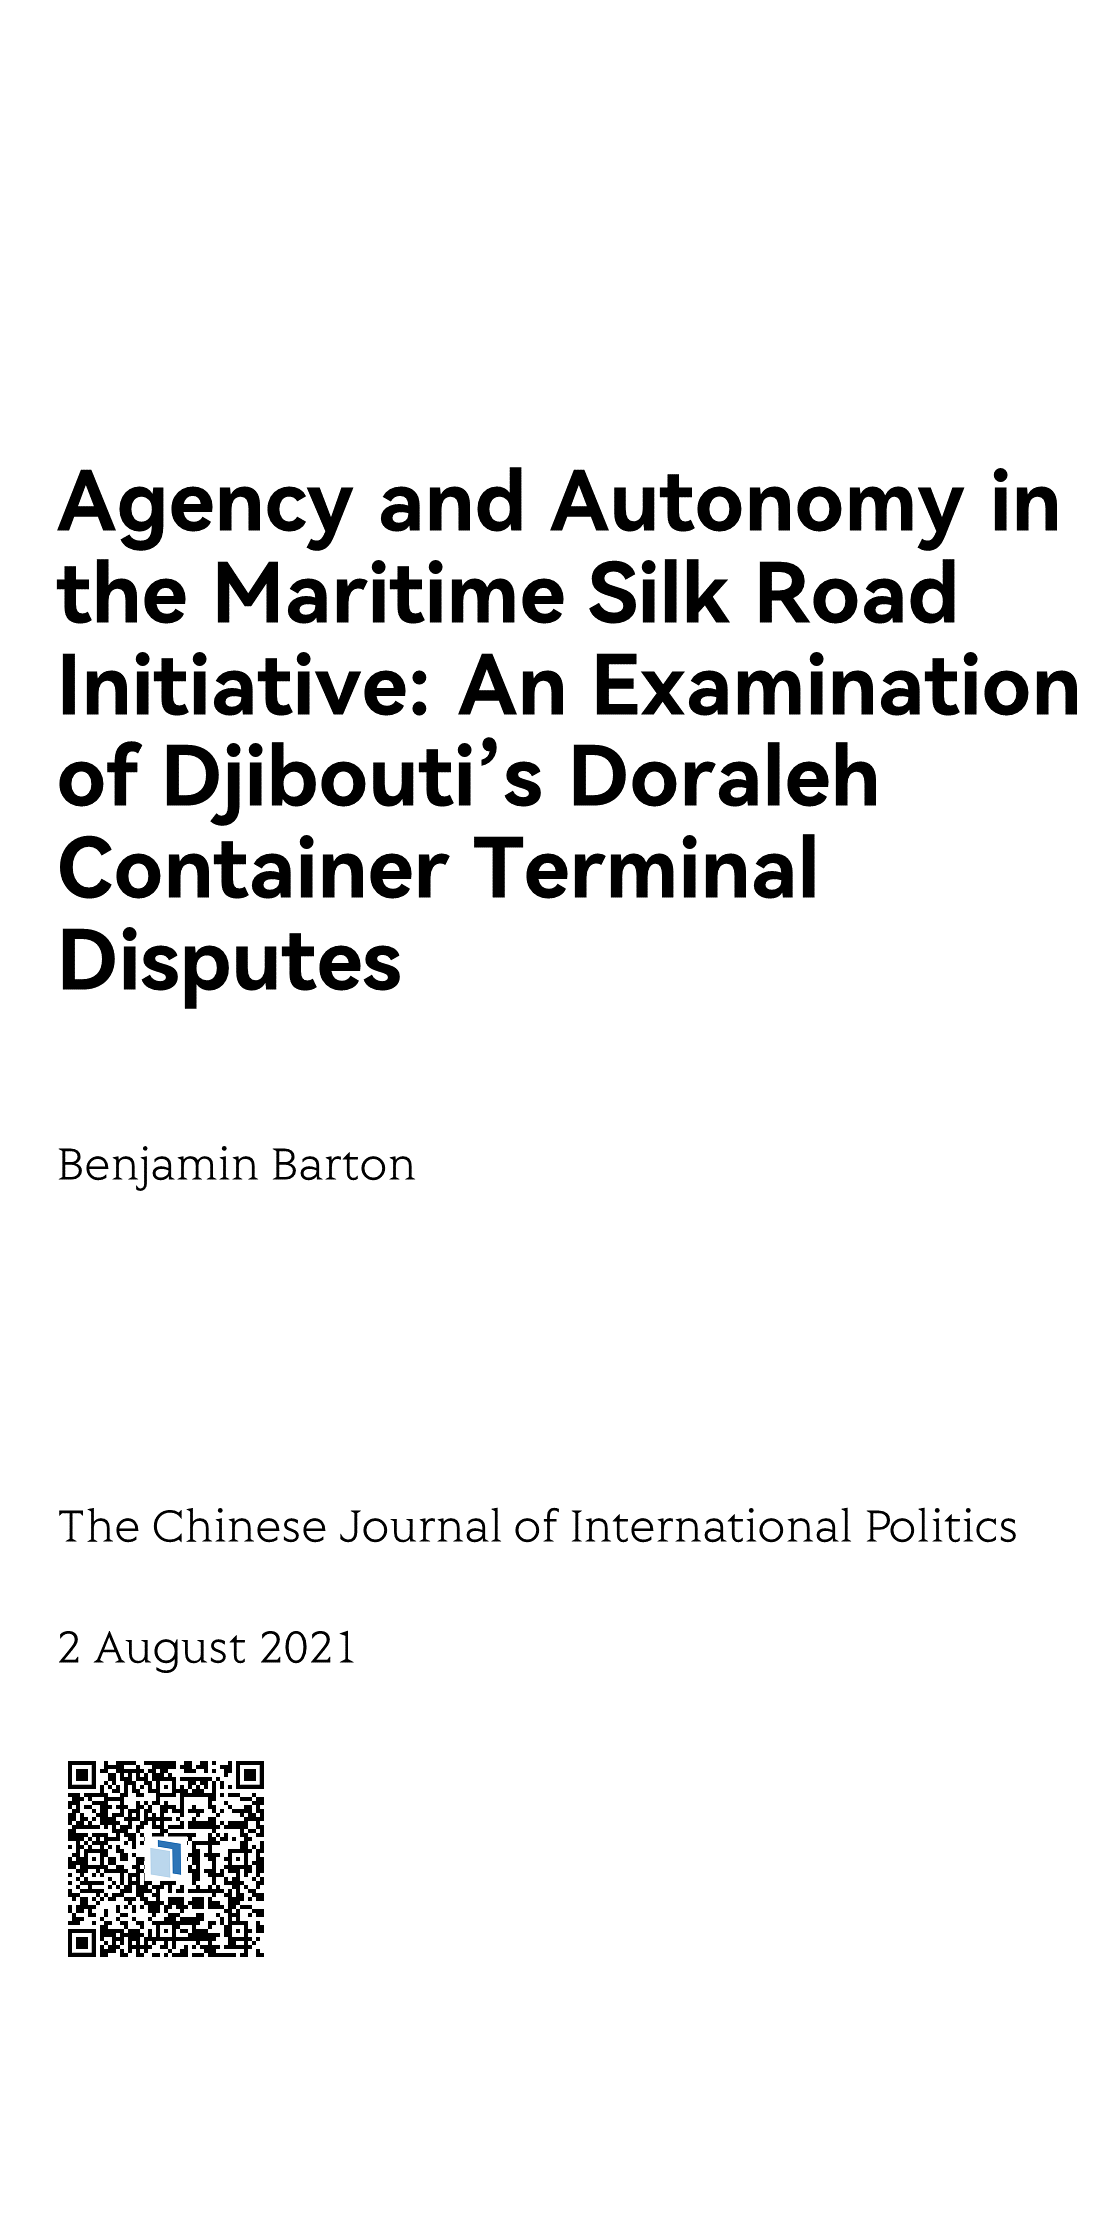 Agency and Autonomy in the Maritime Silk Road Initiative: An Examination of Djibouti's Doraleh Container Terminal Disputes_1